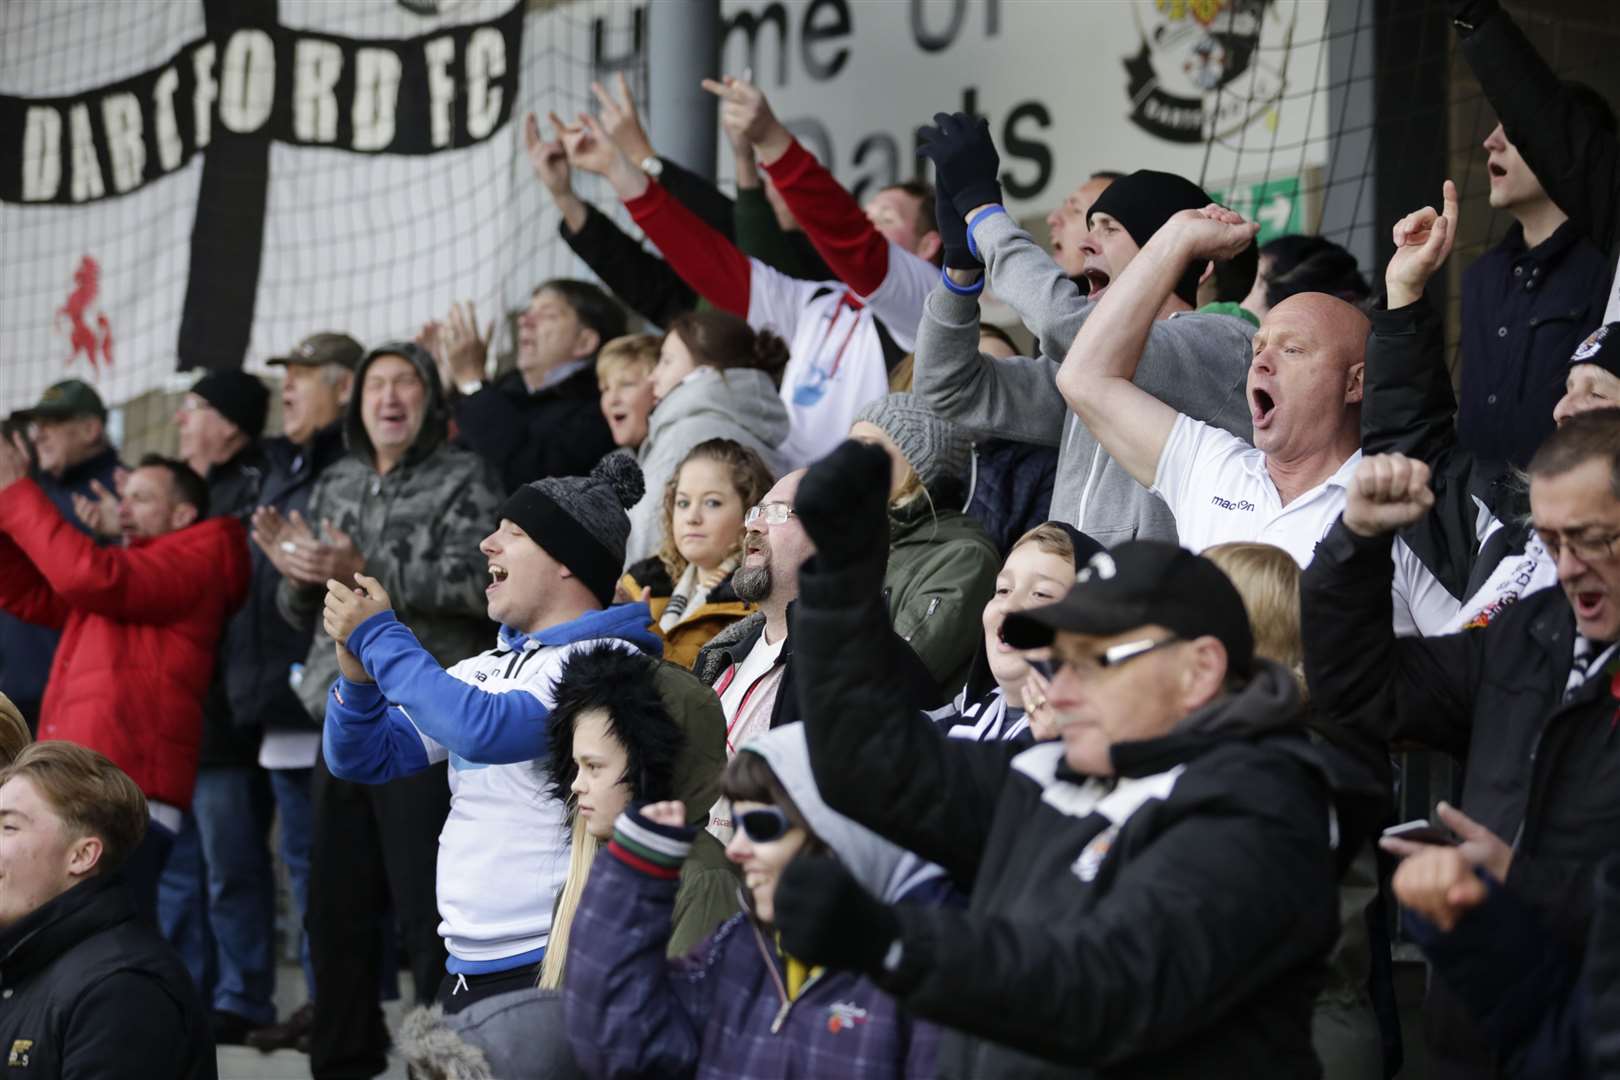 Dartford fans will have a chance to watch their team again next week Picture: Martin Apps